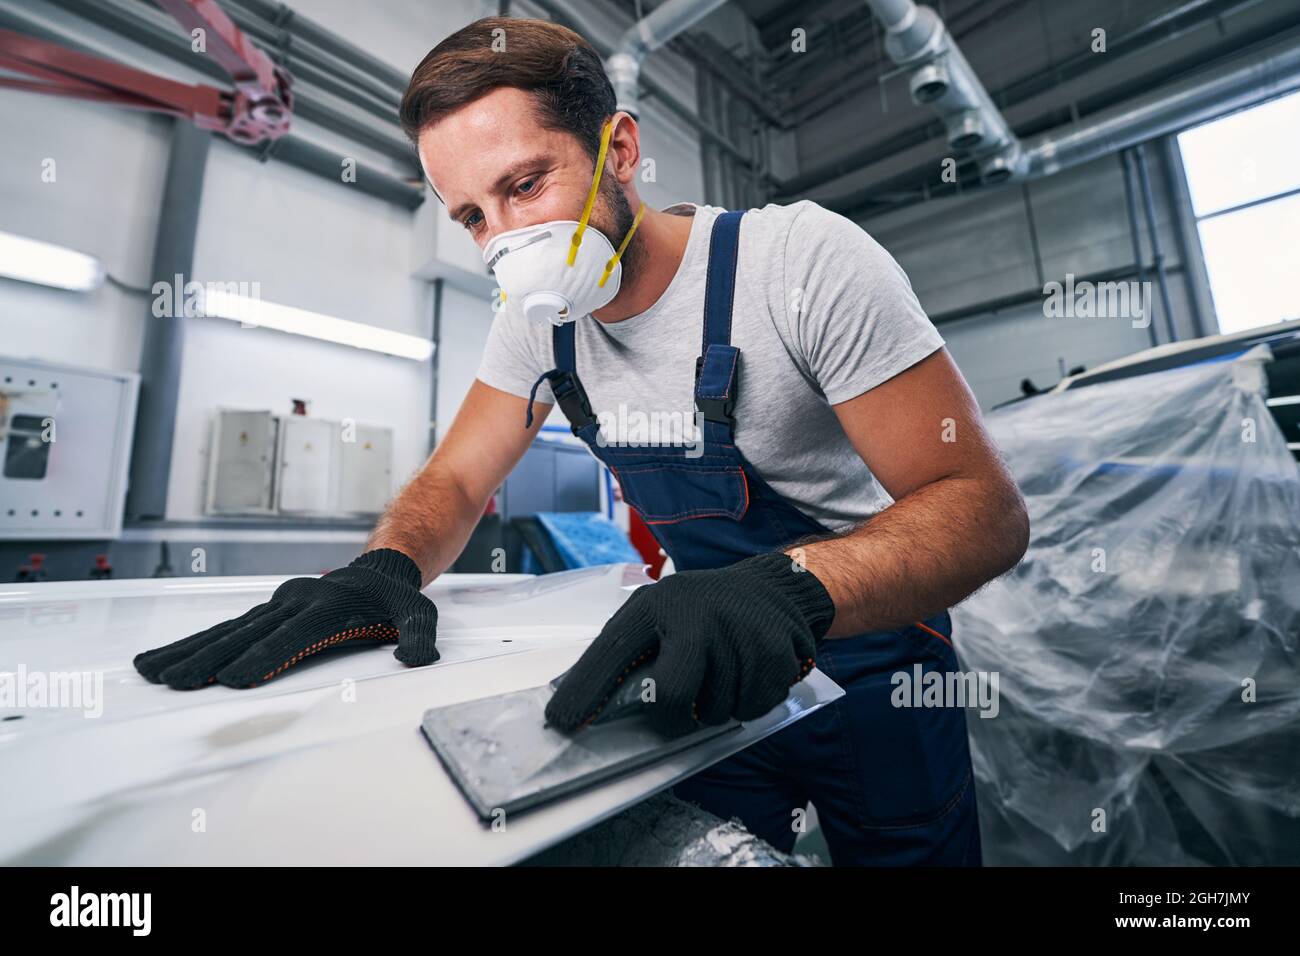 Man sanding white car part with hand instrument Stock Photo